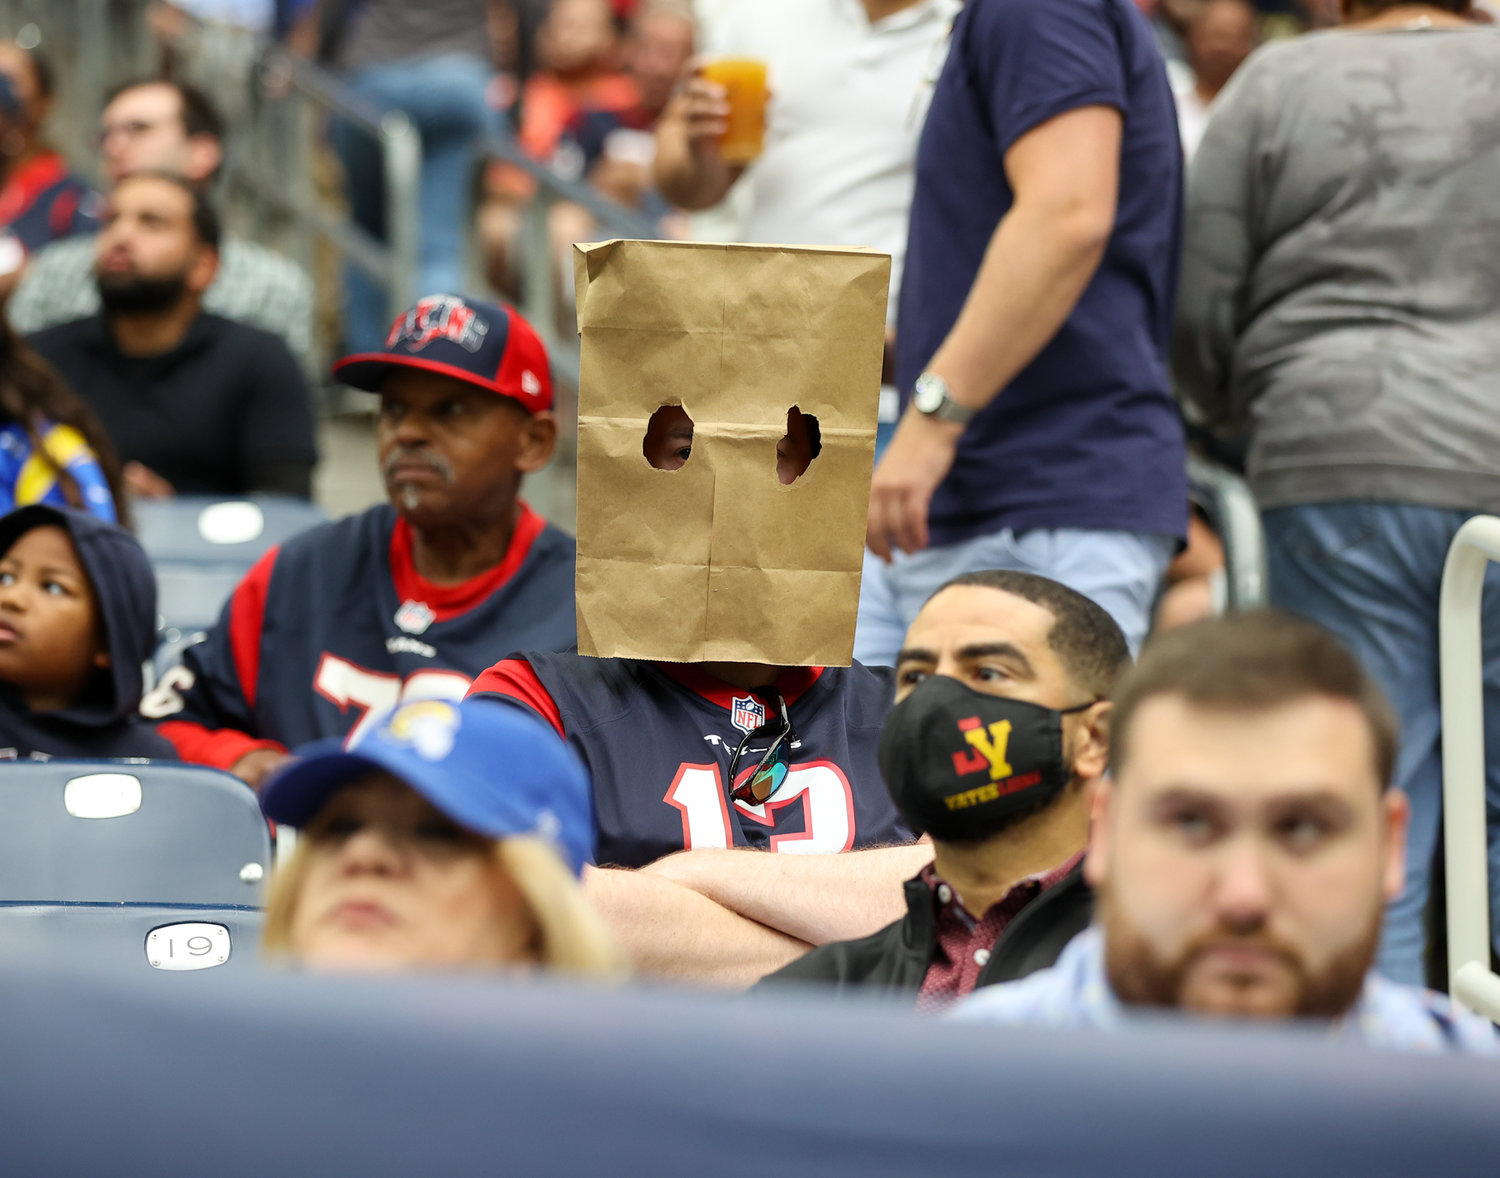 A Houston Texans fan wears a bag over his head on a Halloween day game during an NFL game between Houston and the Los Angeles Rams, October 31, 2021 in Houston, Texas.